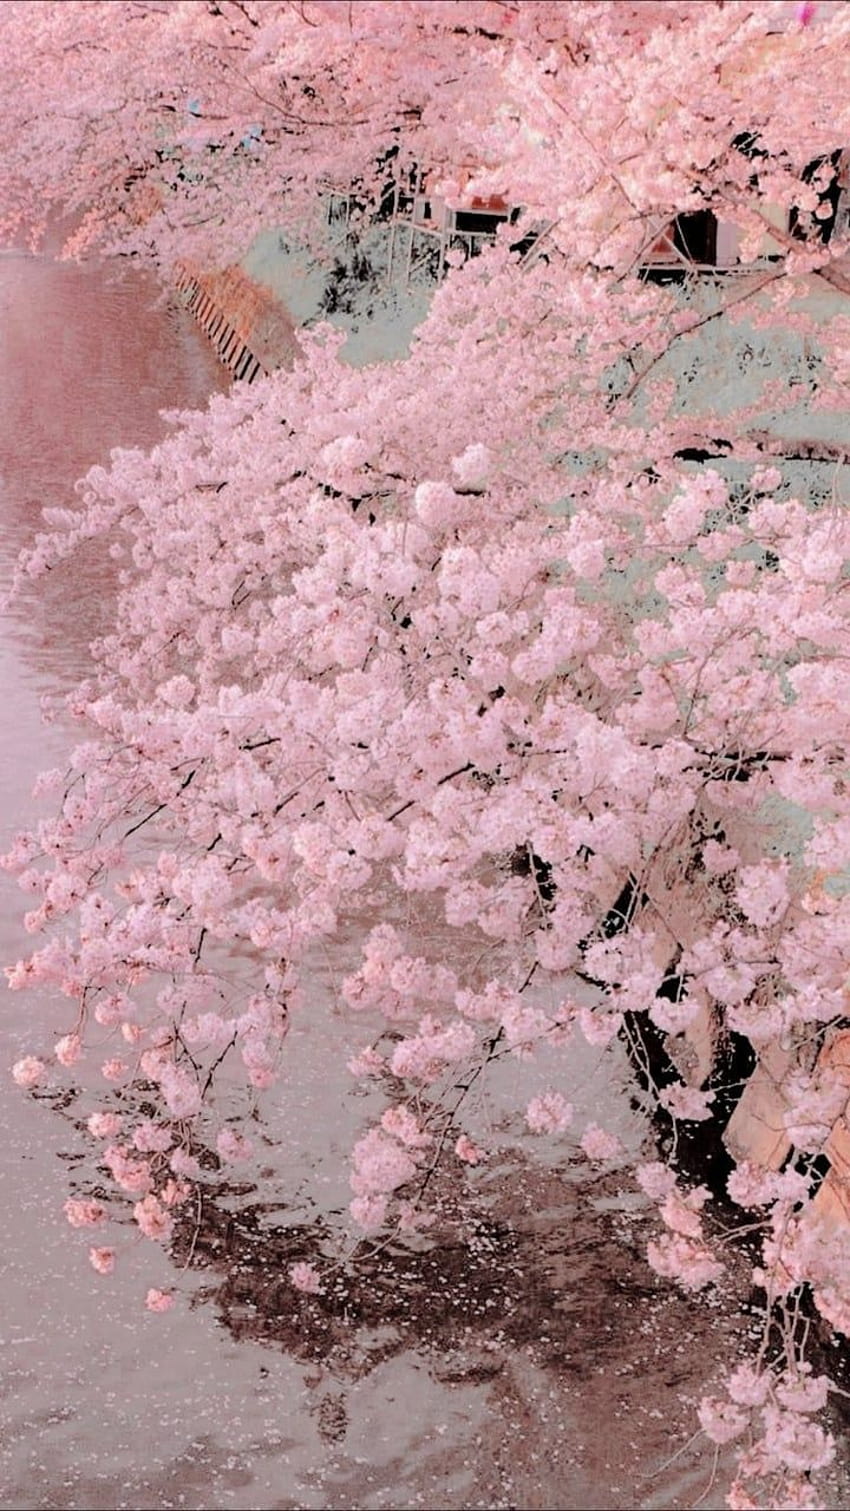 A pink tree is in the water - Cherry blossom